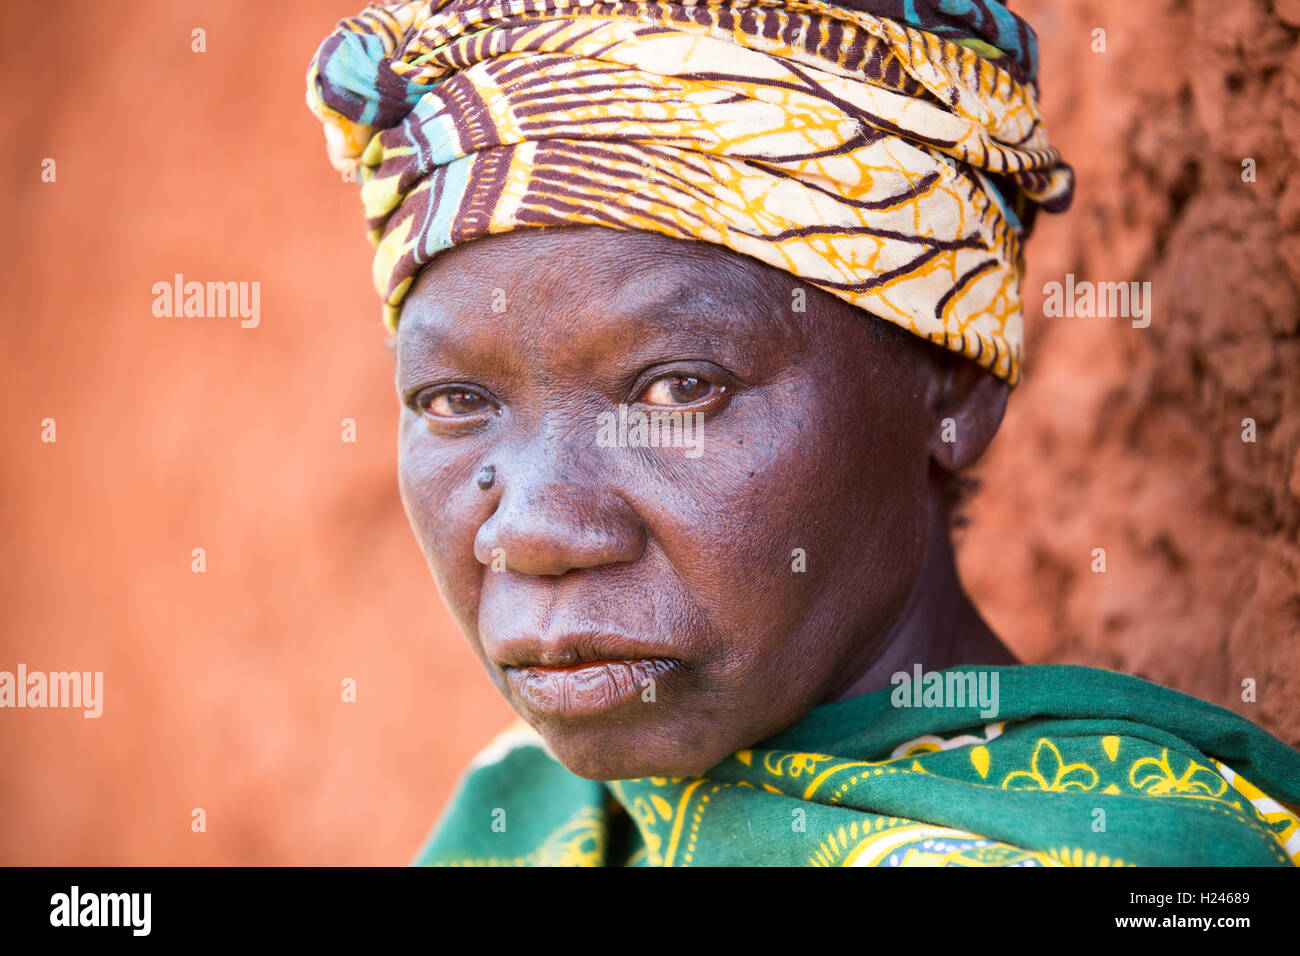 Namina village, Nampula Province, Mozambique, August 2015:  Maria Albino, 42, at home. She is blind with bilateral cataracts and needs help to do most tasks. Photo by Mike Goldwater Stock Photo